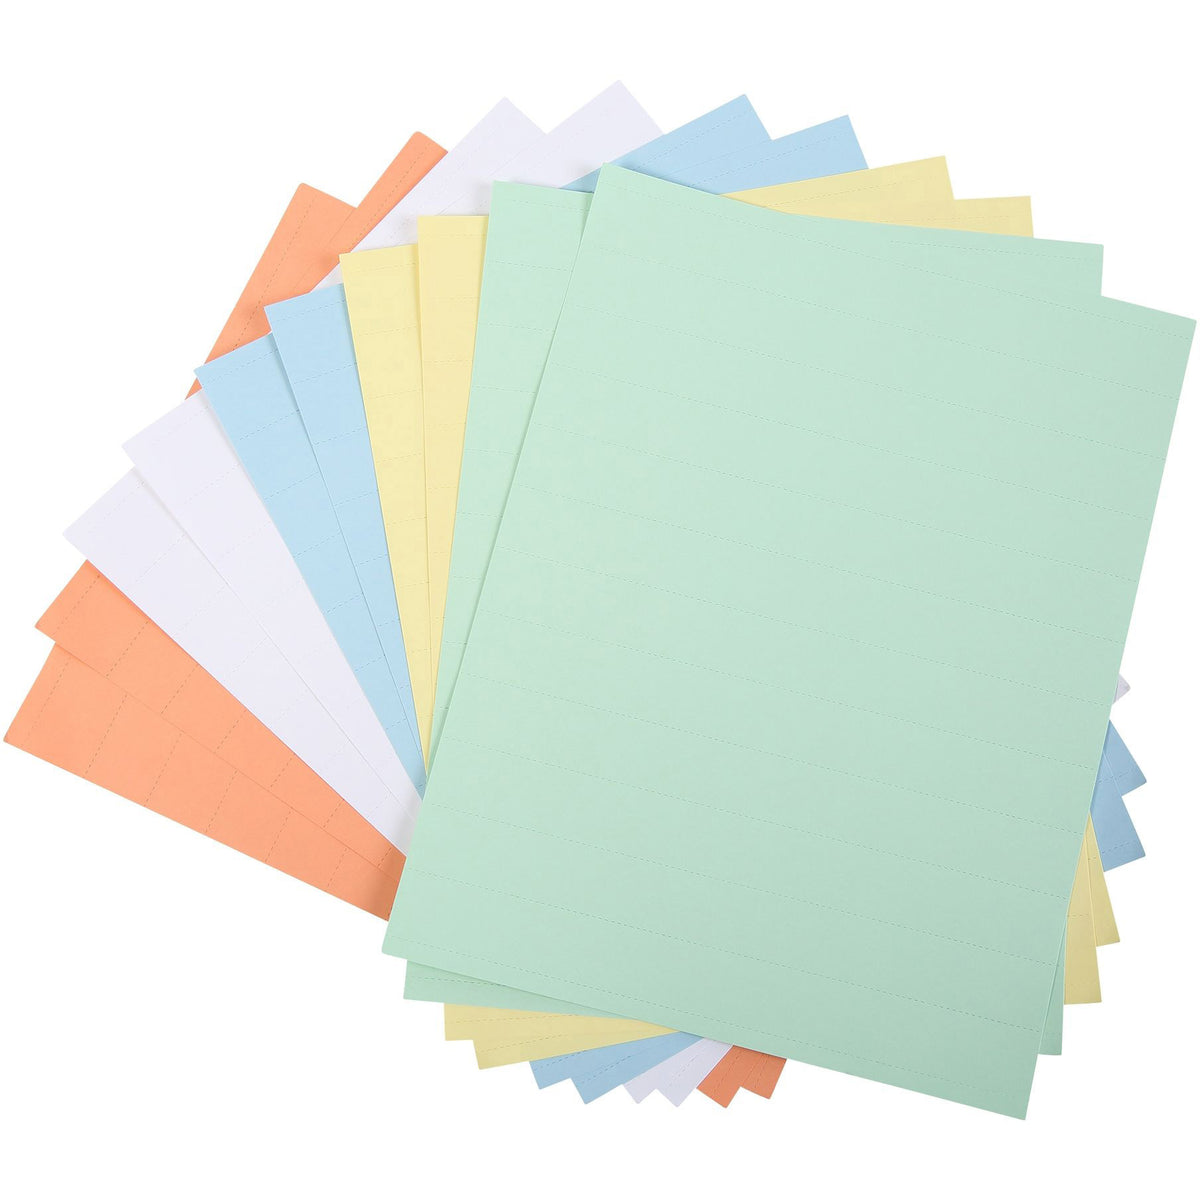 FM1614 Data Card Replacement 8.5" x 1" Inserts, 8.5" x 11" Sheets, 10 Total Sheets,  Assorted Colors by MasterVision